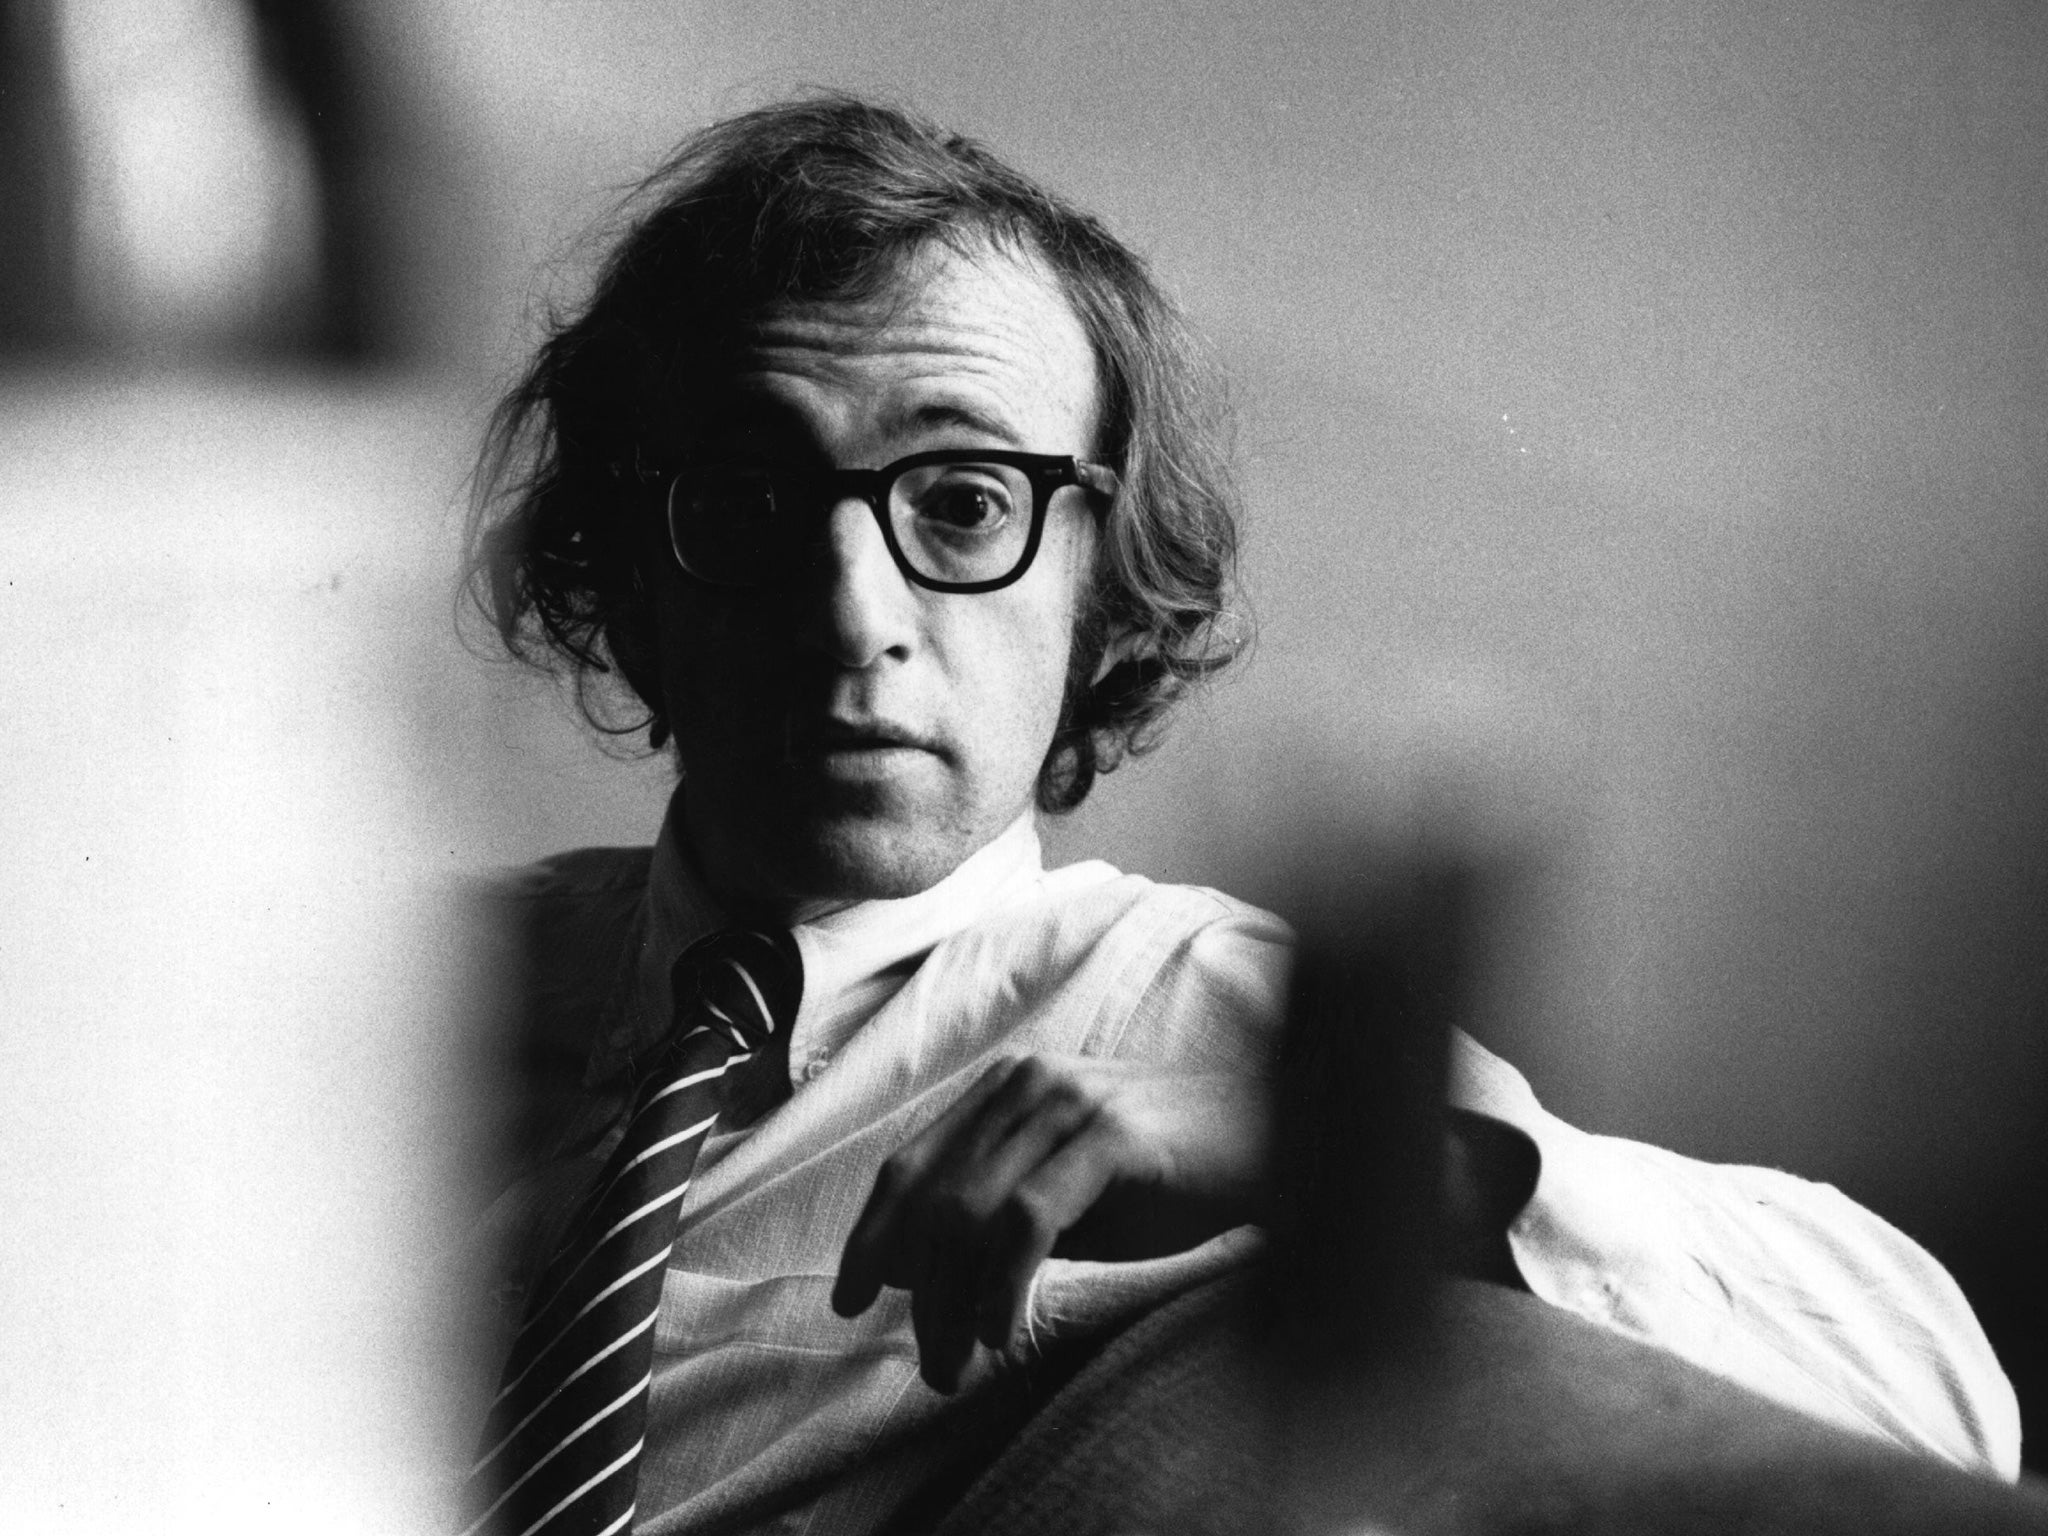 Like other original thinkers, Woody Allen has suffered for his art